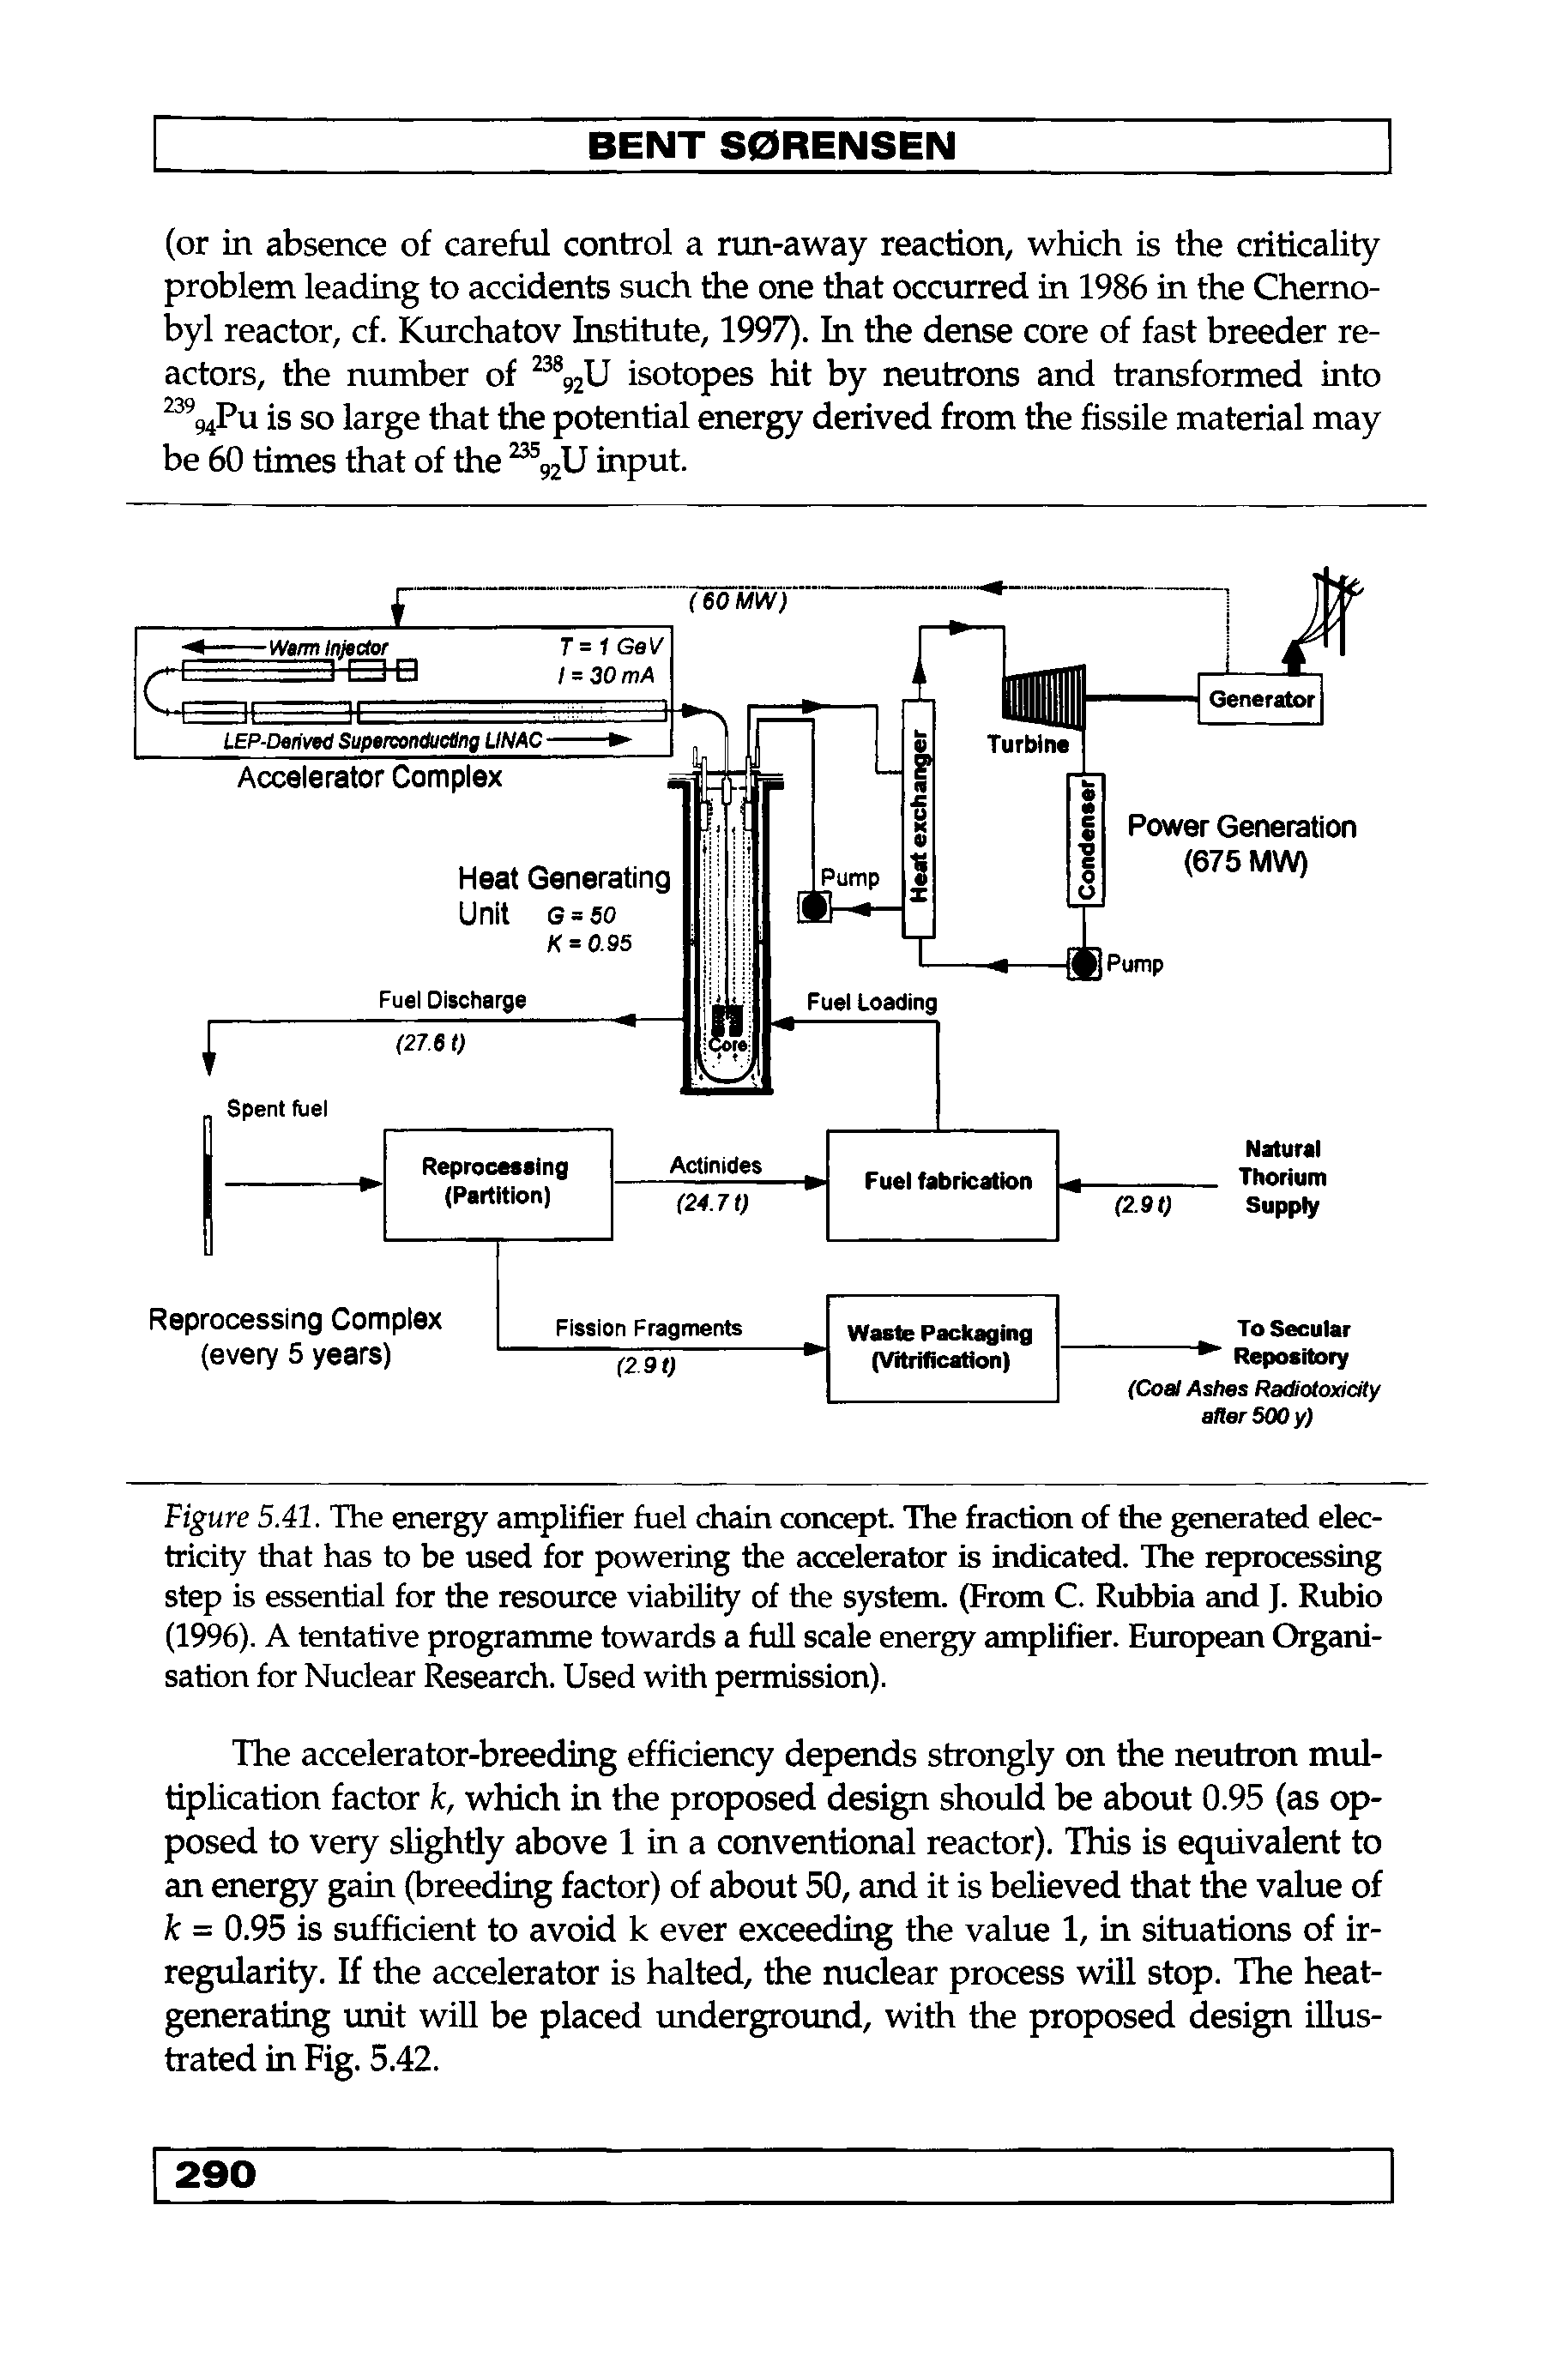 Figure 5.41. The energy amplifier fuel chain concept. The fraction of the generated electricity that has to be used for powering the accelerator is indicated. The reprocessing step is essential for the resource viability of the system. (From C. Rubbia and J. Rubio (1996). A tentative programme towards a full scale energy amplifier. European Organisation for Nuclear Research. Used with permission).